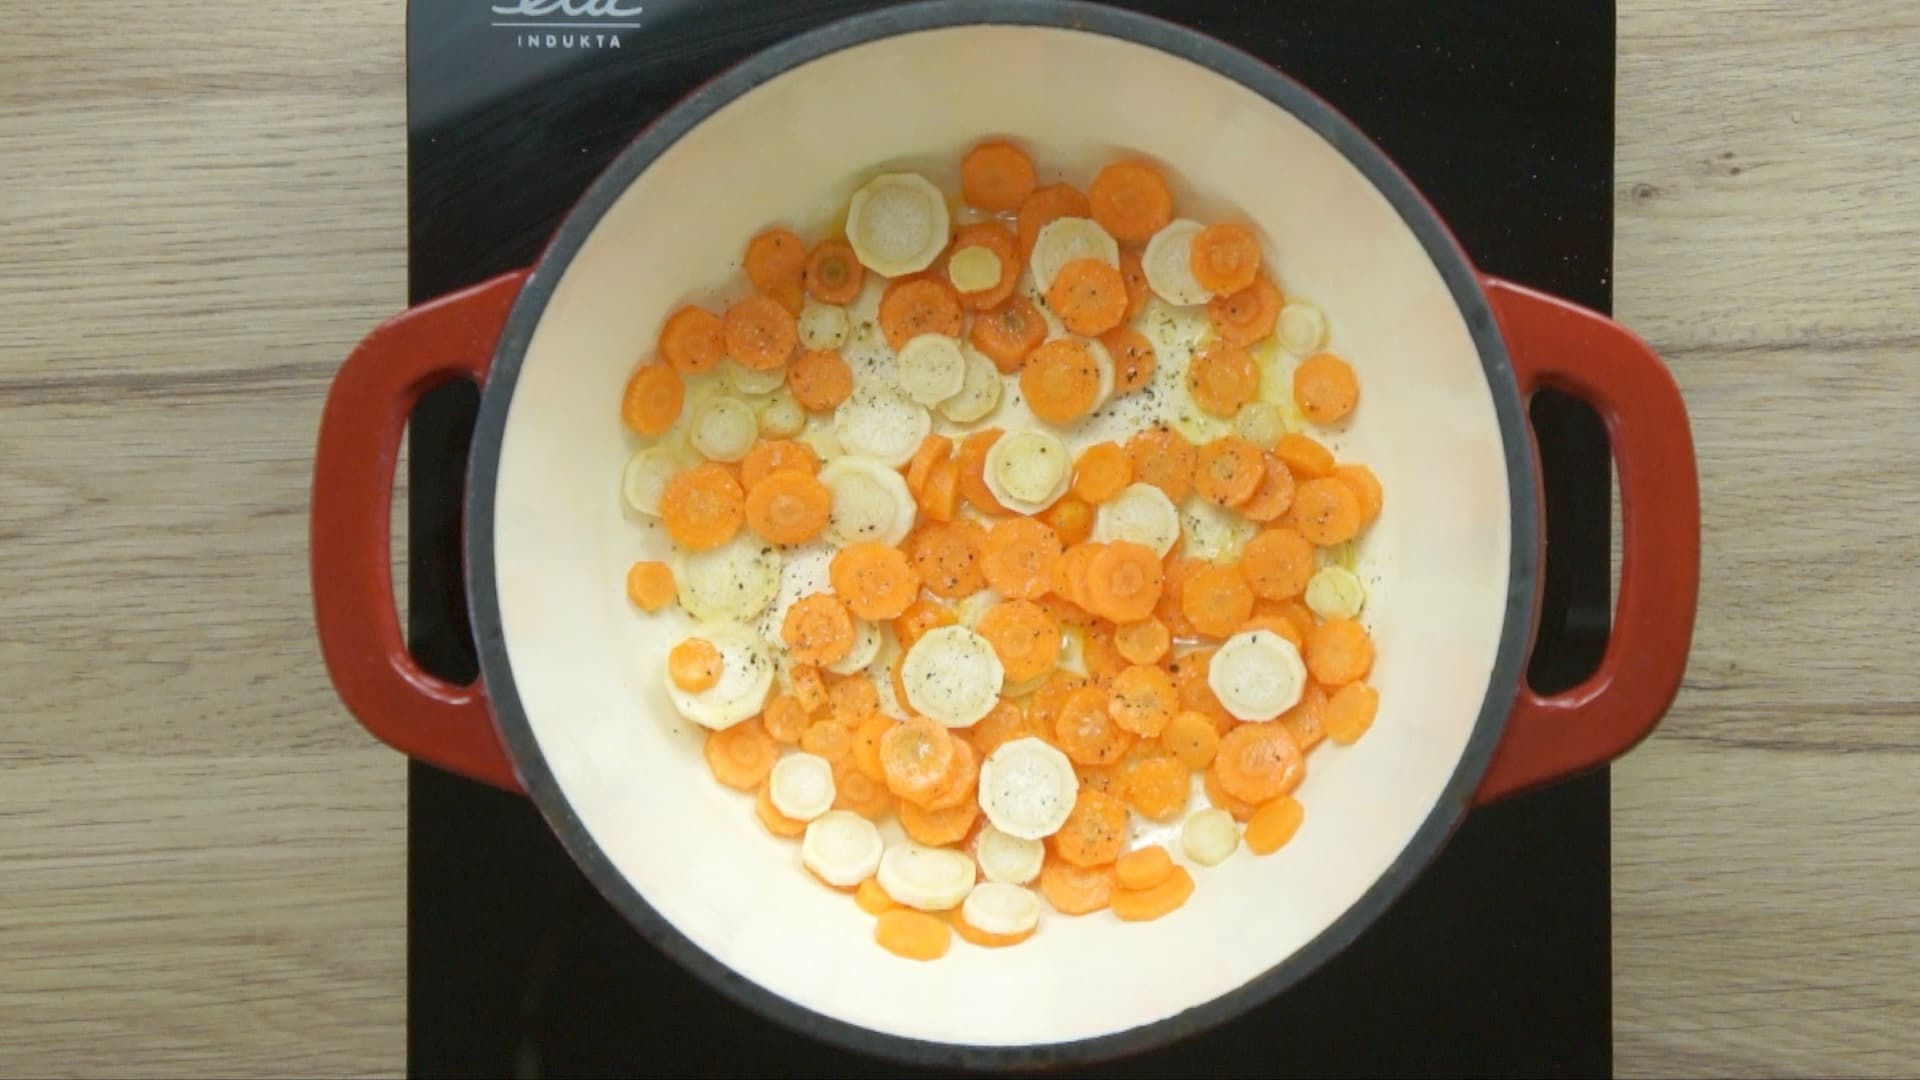 Red enameled Dutch oven with carrot and parsnip slices. 